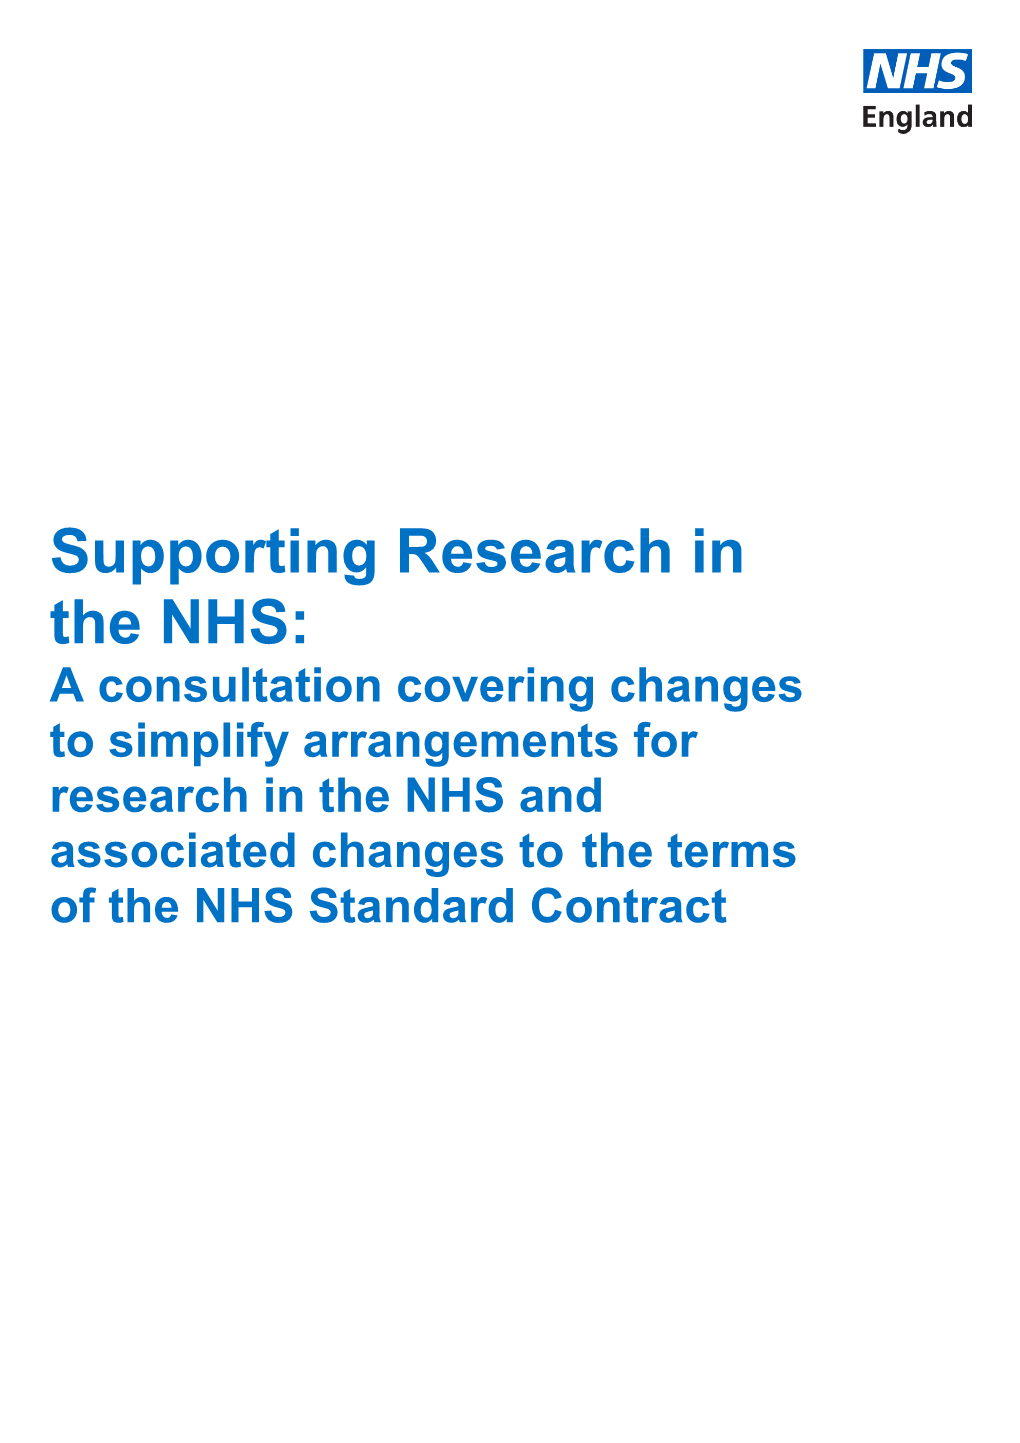 Supporting Research in the NHS